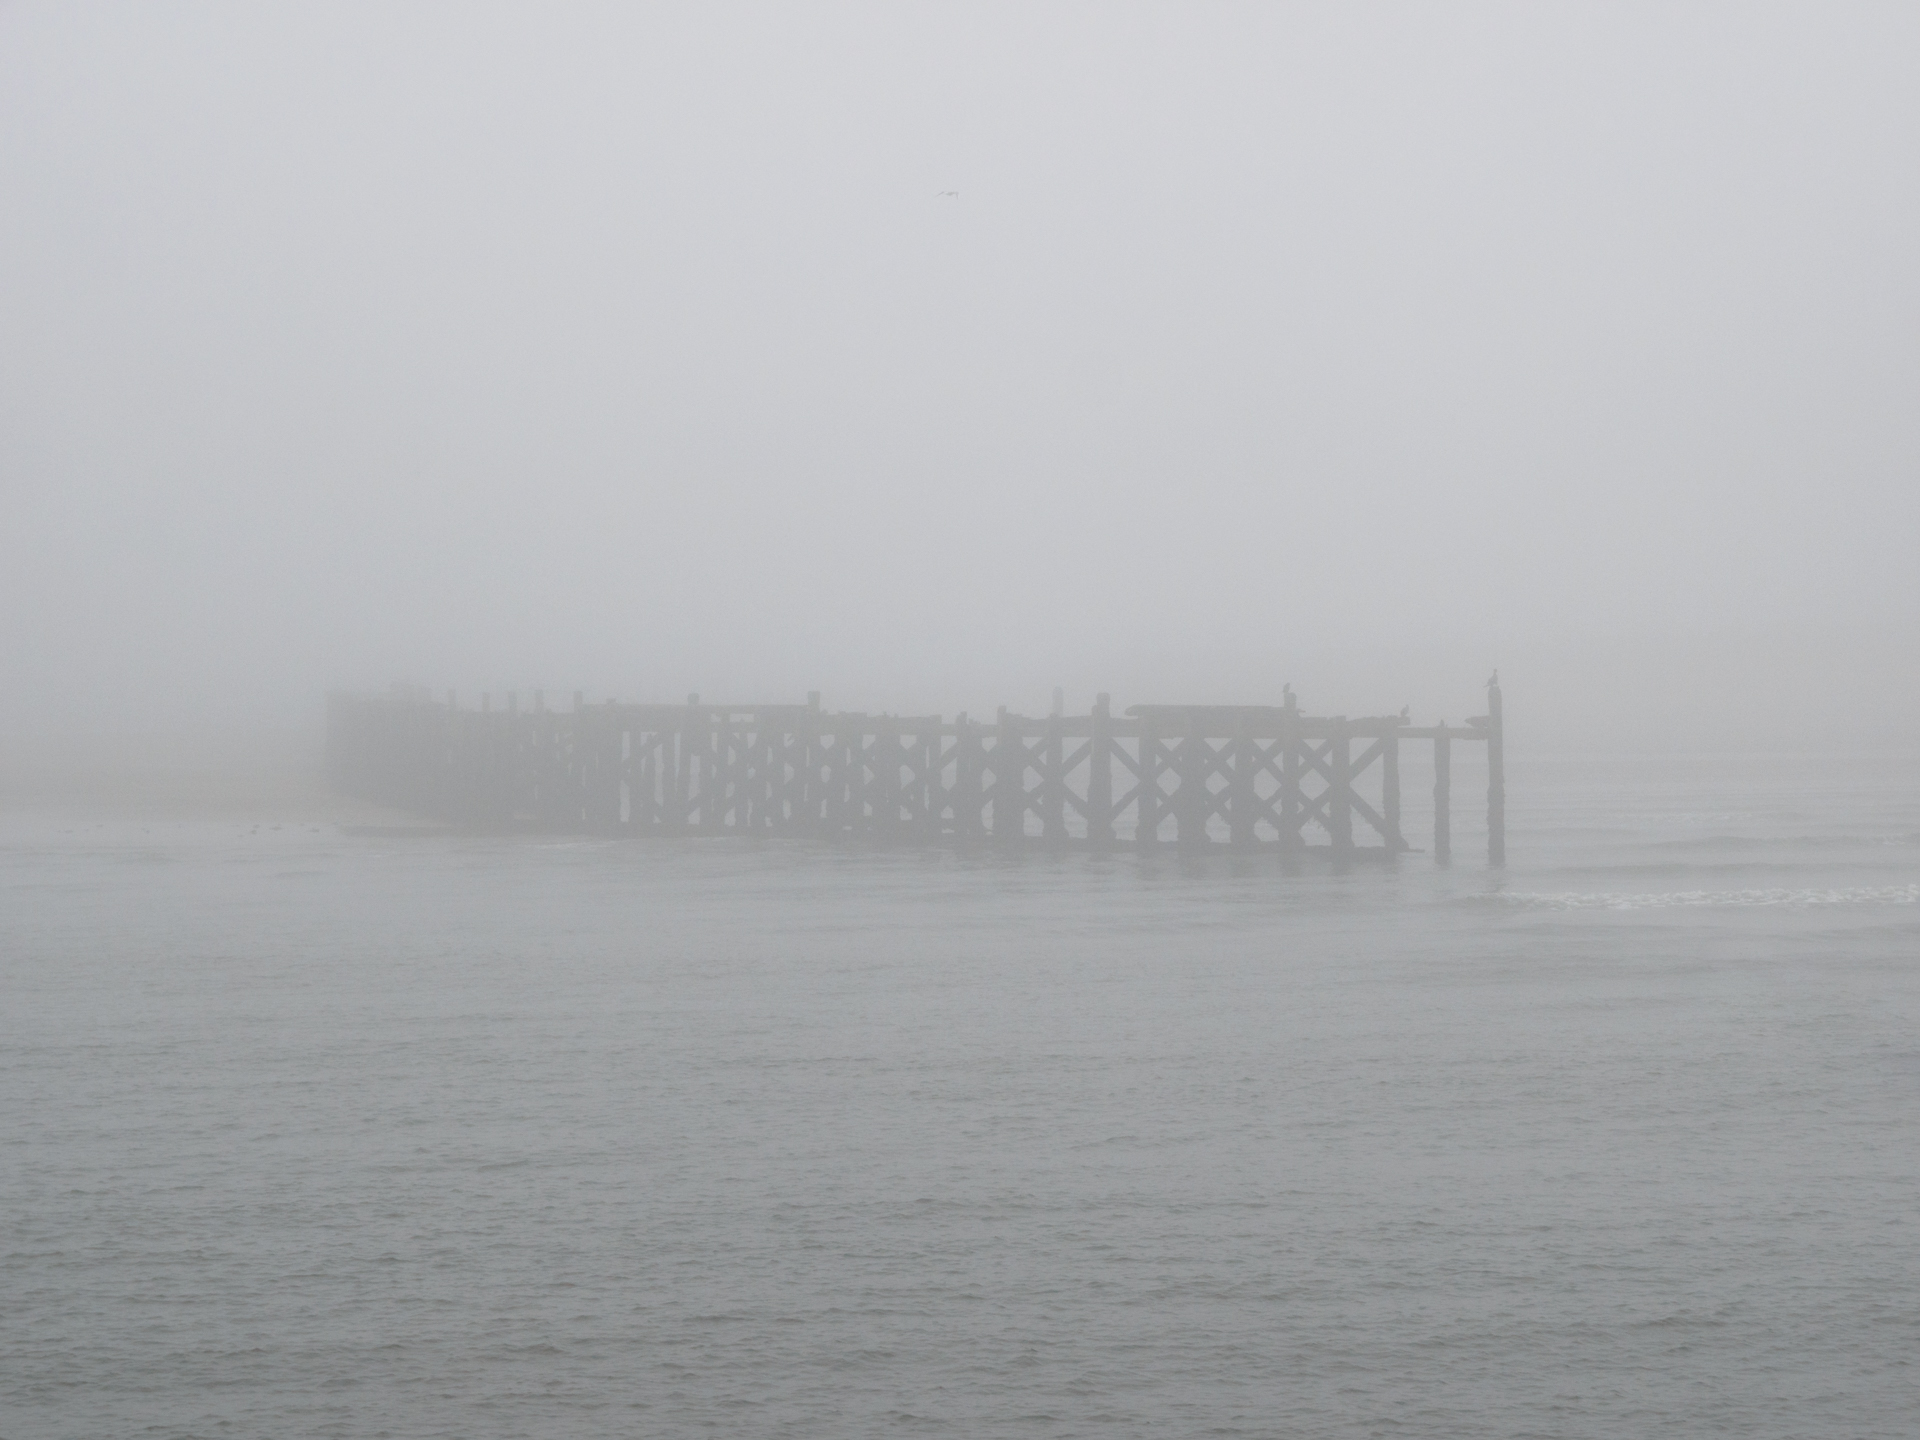 North Pier in the fog